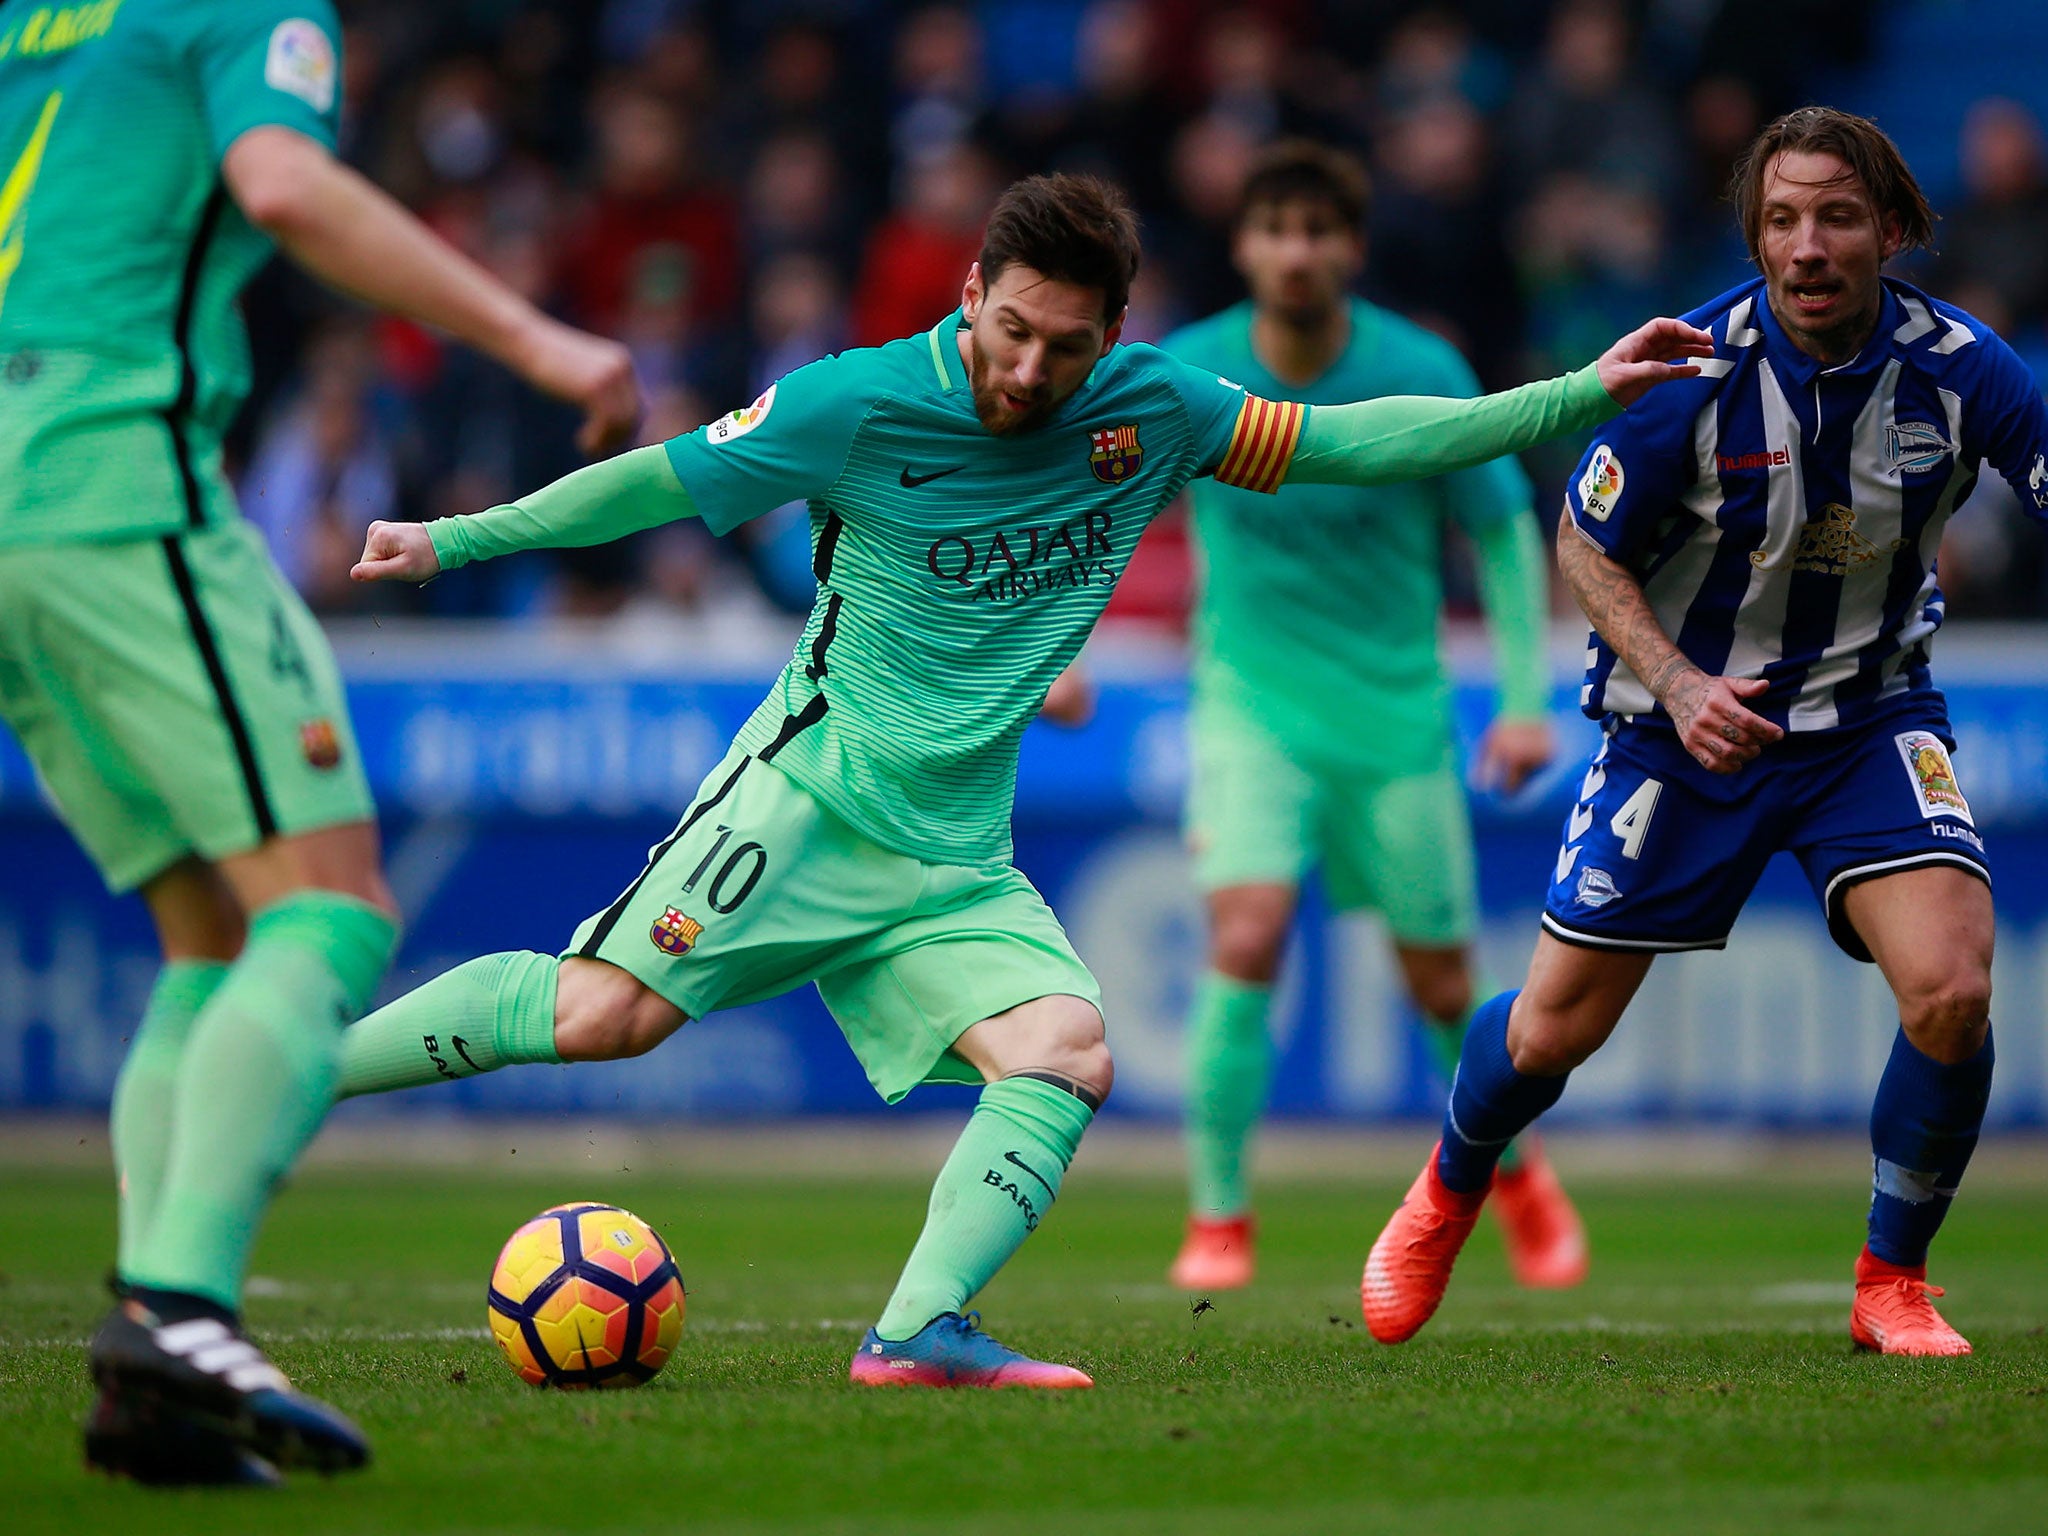 Can Messi and Co hit back after their humiliating defeat in Paris?